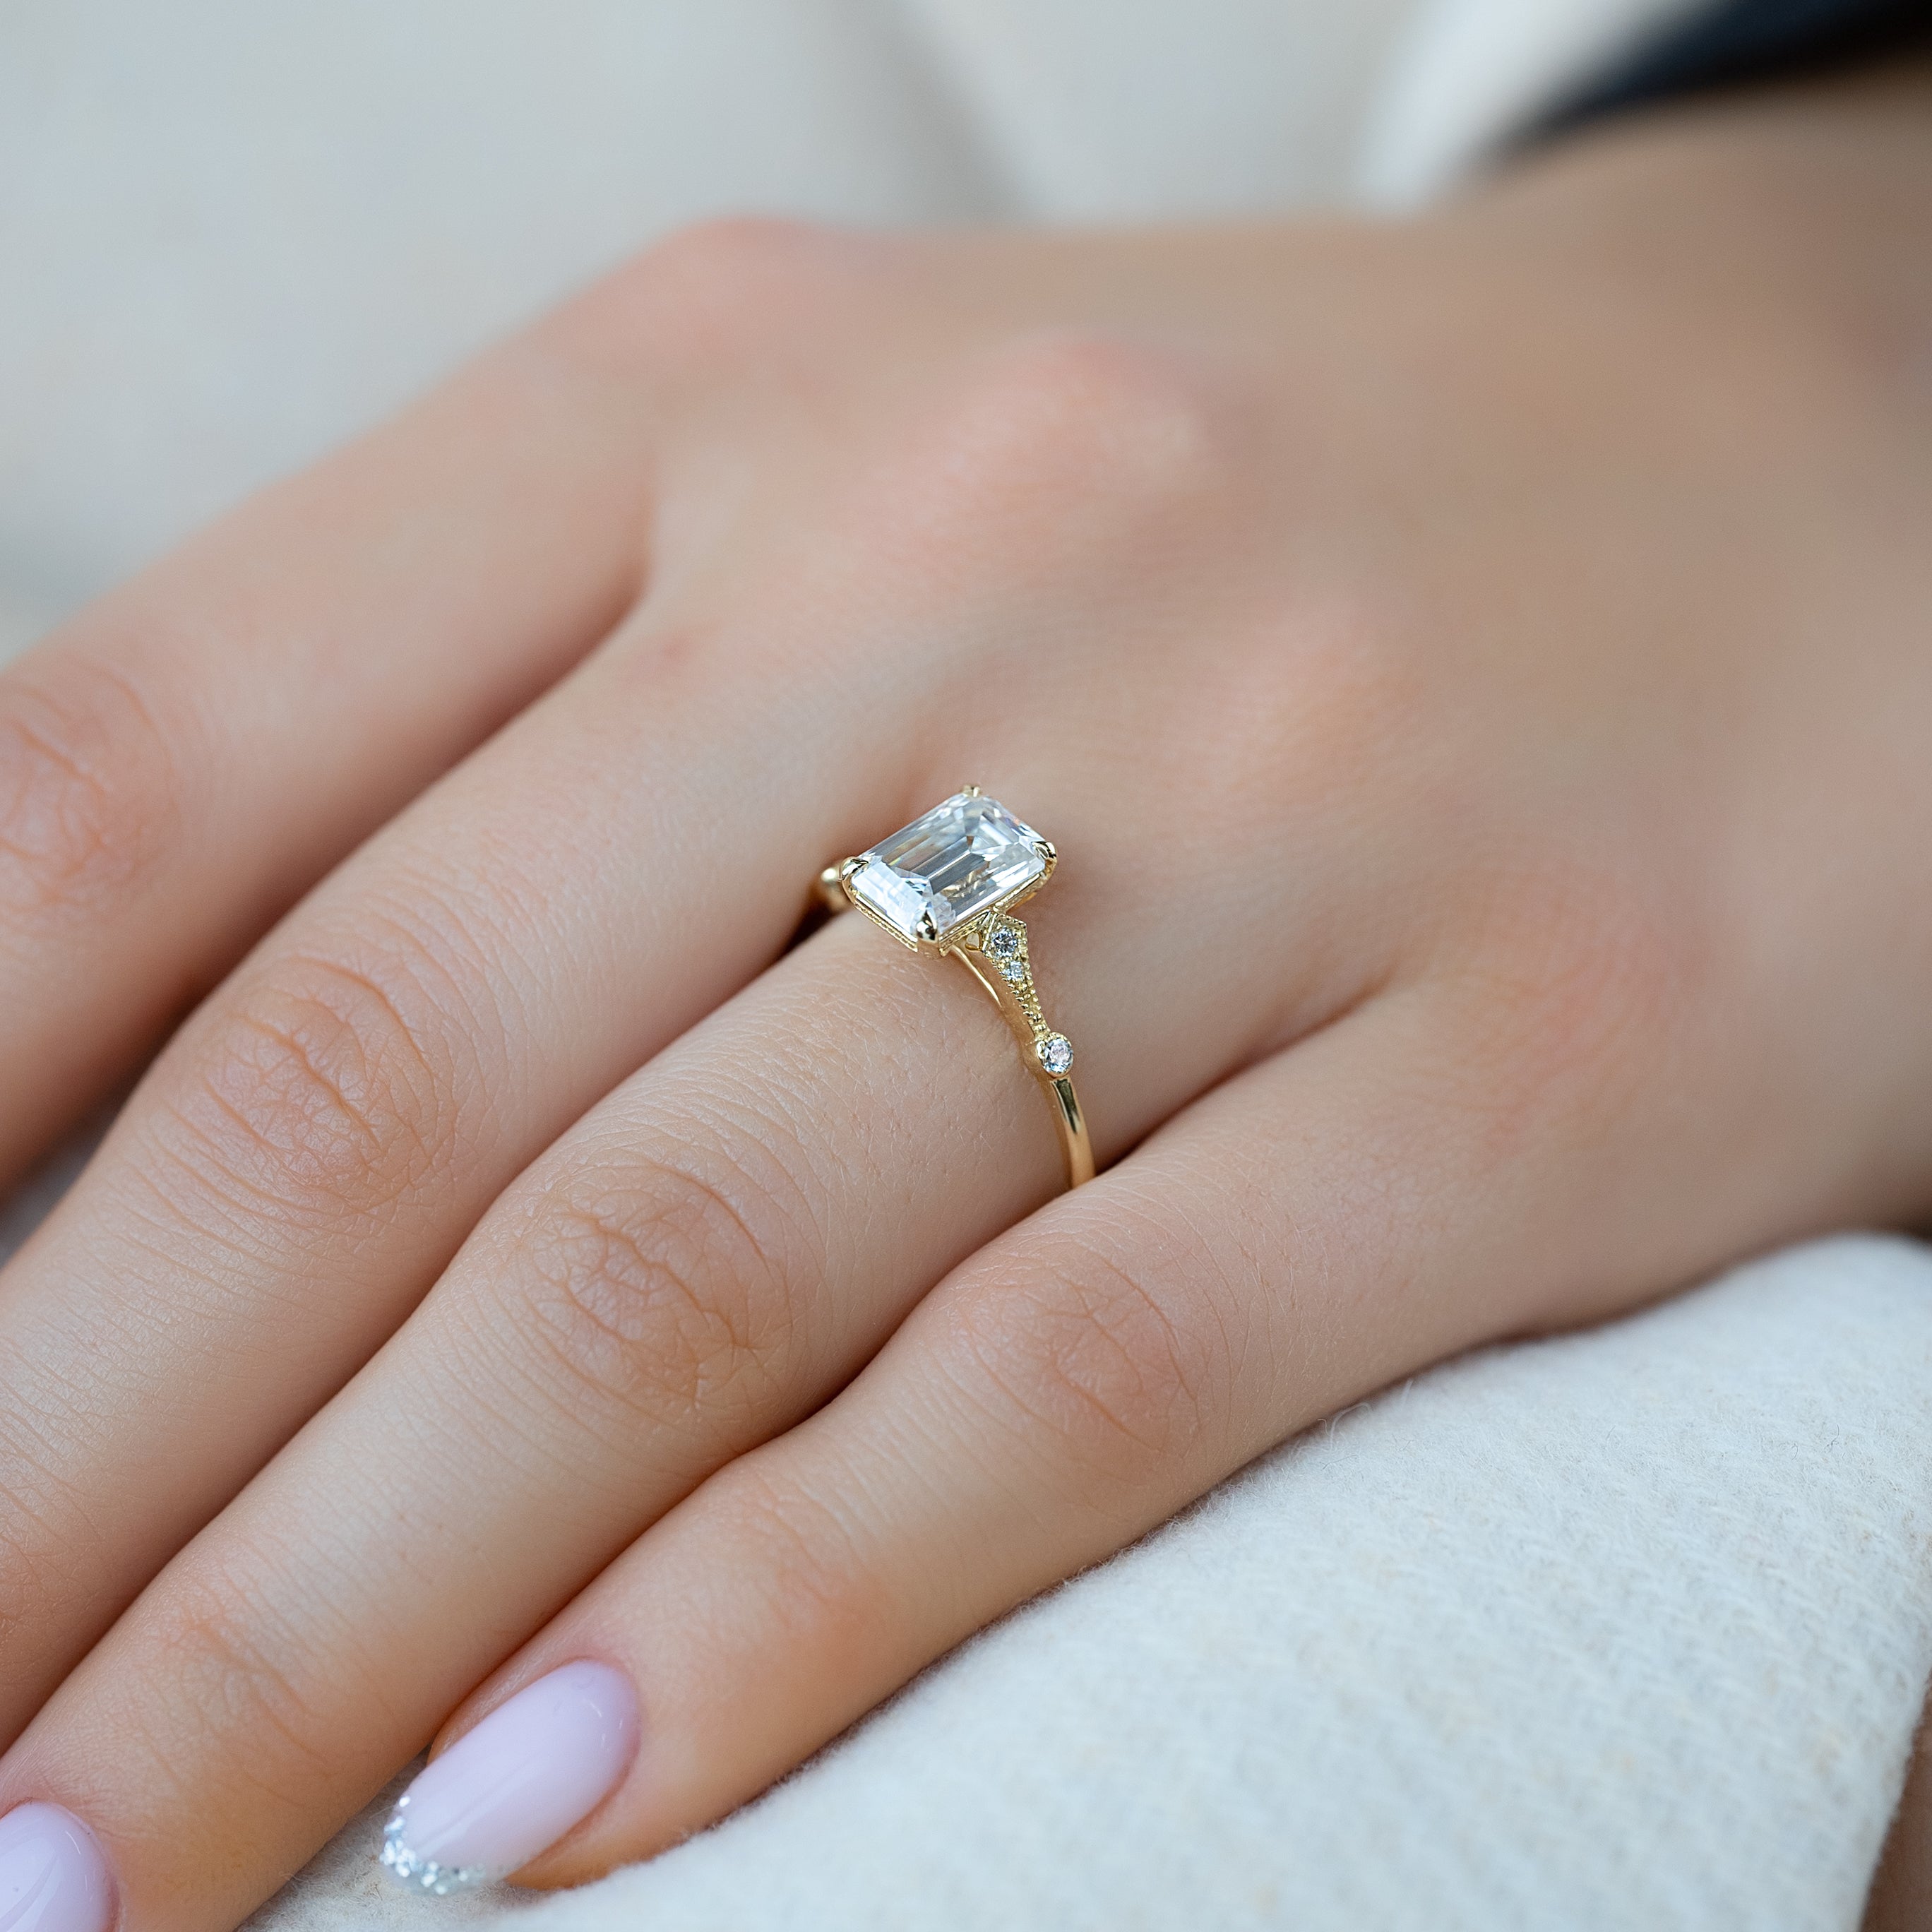 60 Alternative and Non-Diamond Engagement Rings - Unusual Engagement Rings